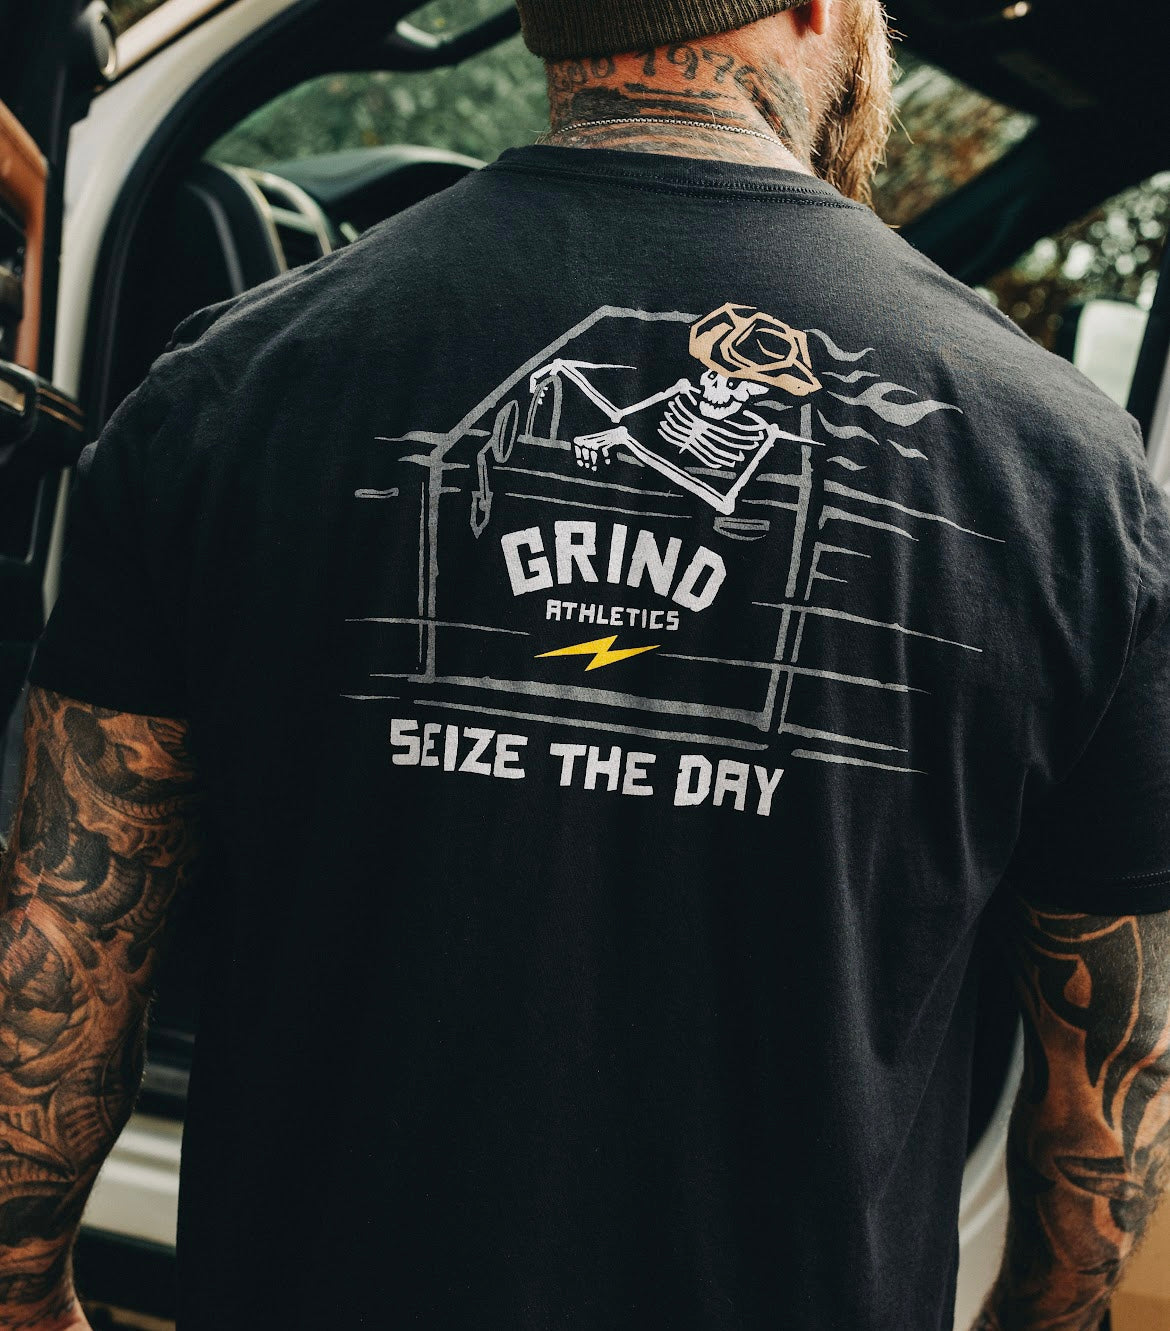 The Grind Athletics Graphic T-Shirt S / Black Seize the Day